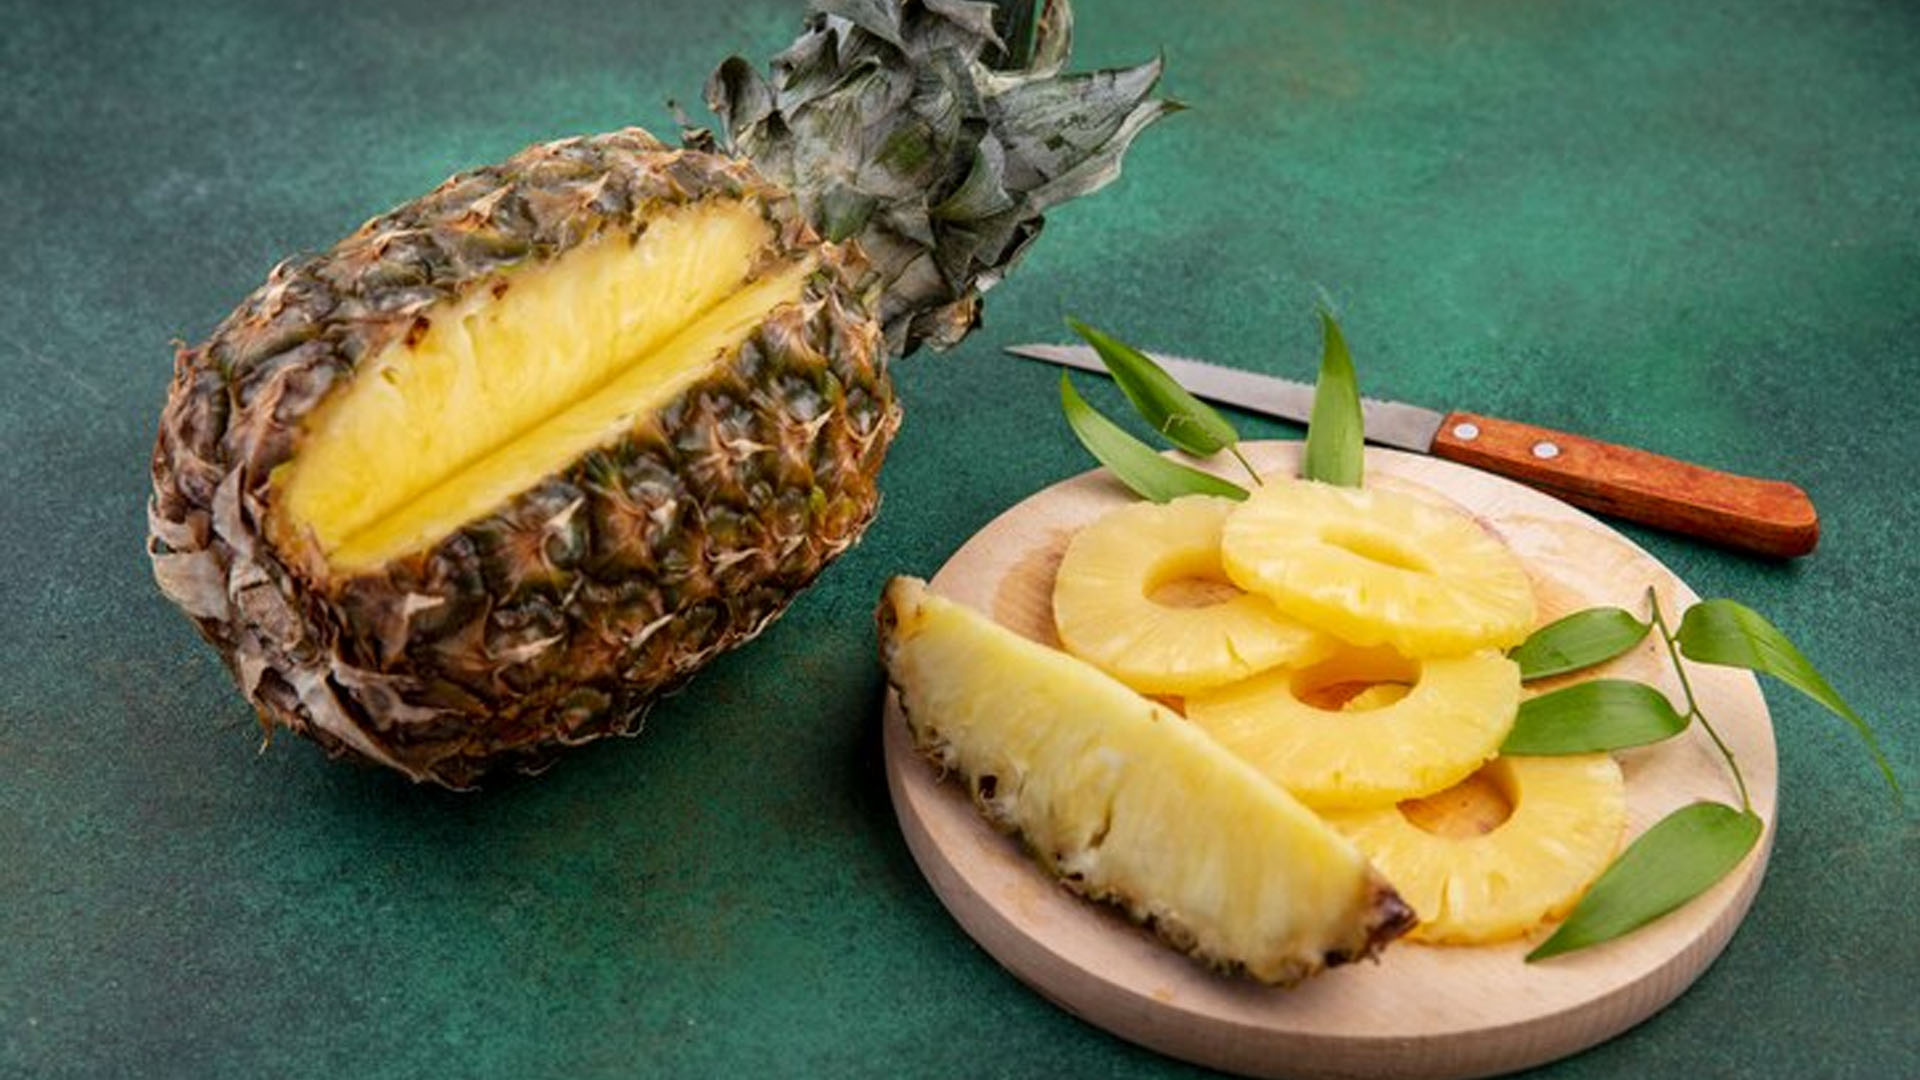 Does Canned Pineapple Have Health Benefits?